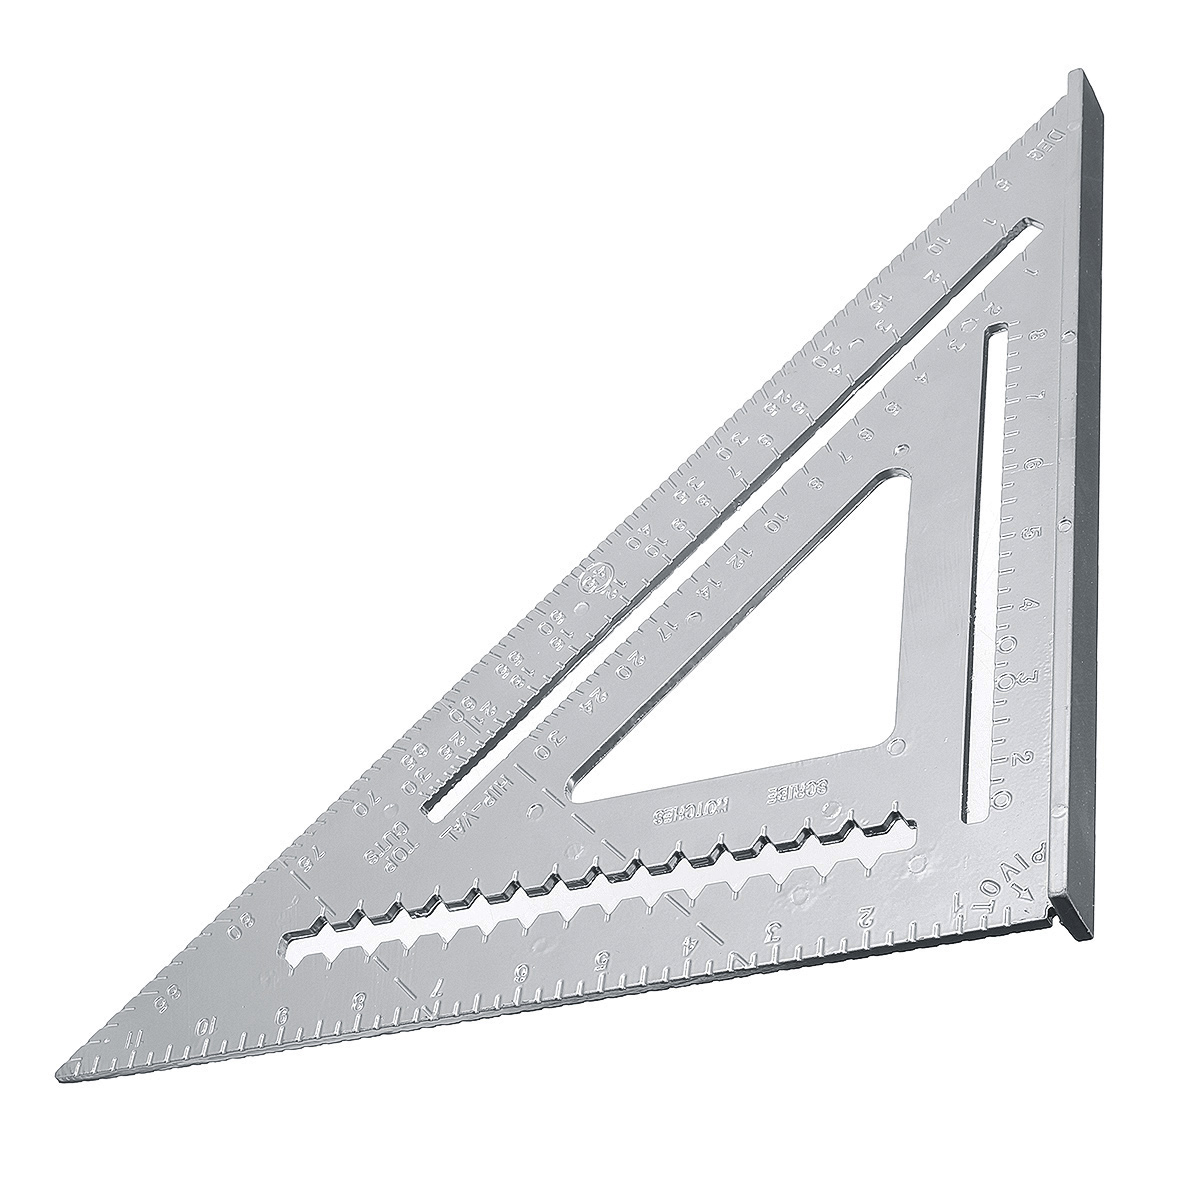 12inch-Aluminum-Alloy-Right-Angle-Triangle-Ruler-Protractor-Framing-Measuring-Tools-1597414-4